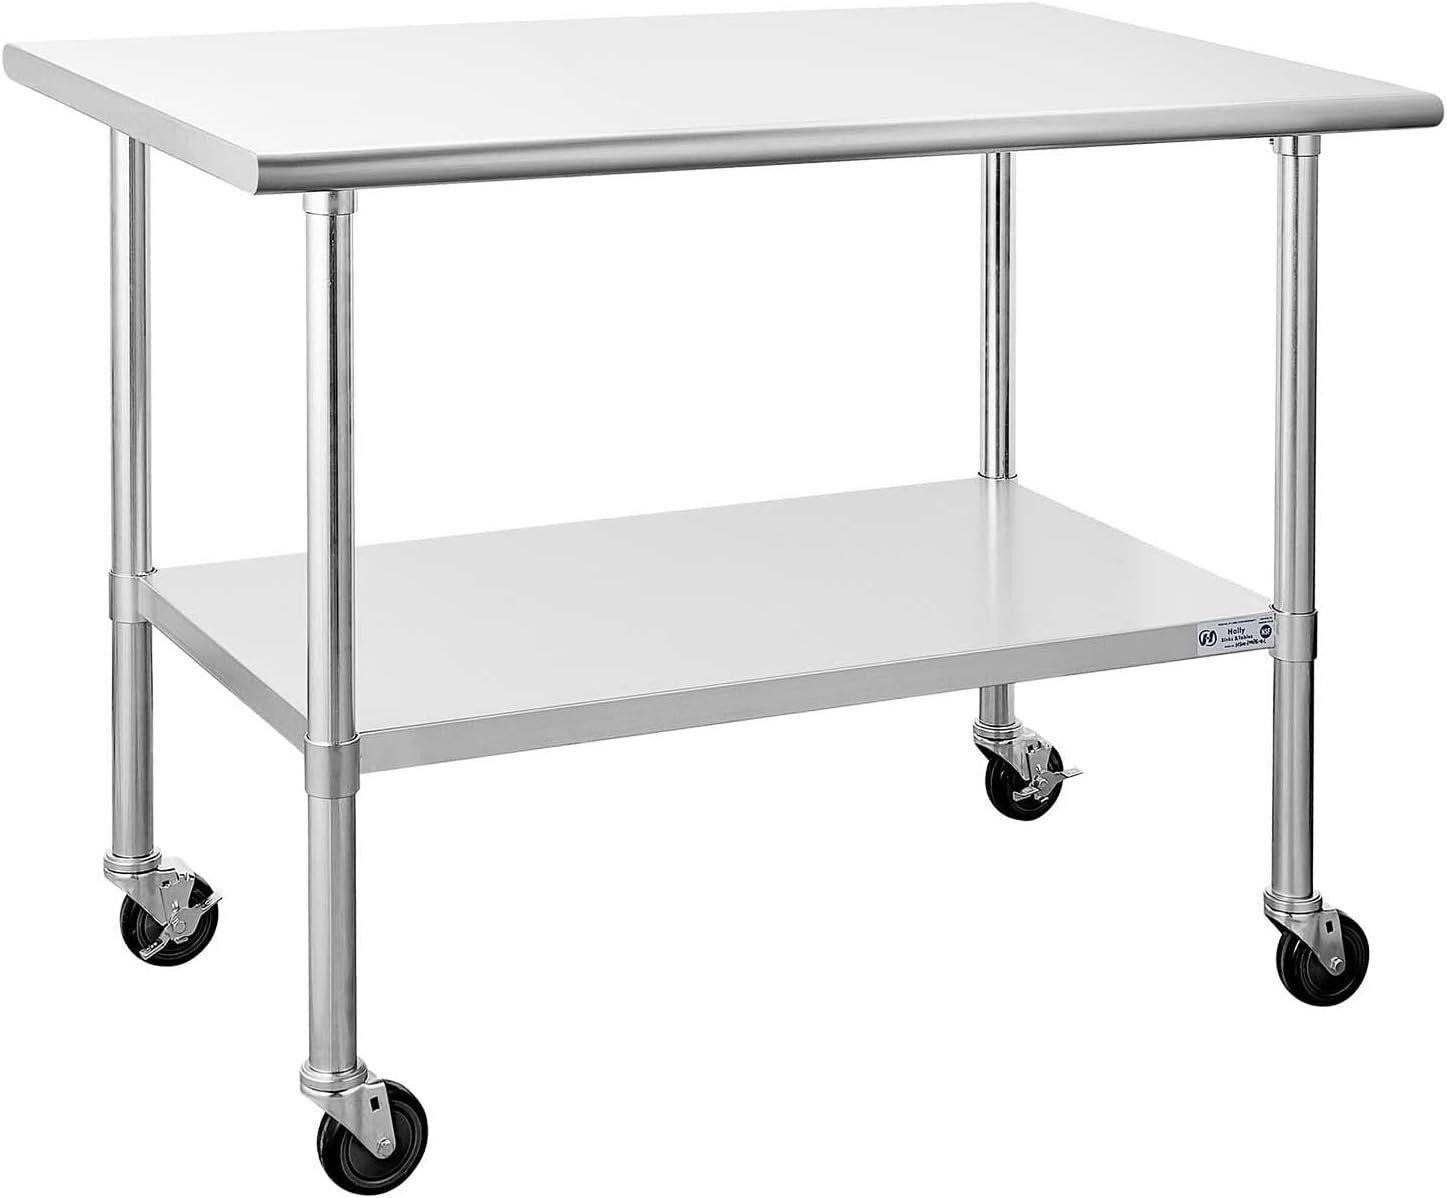 Hally Stainless Steel Table